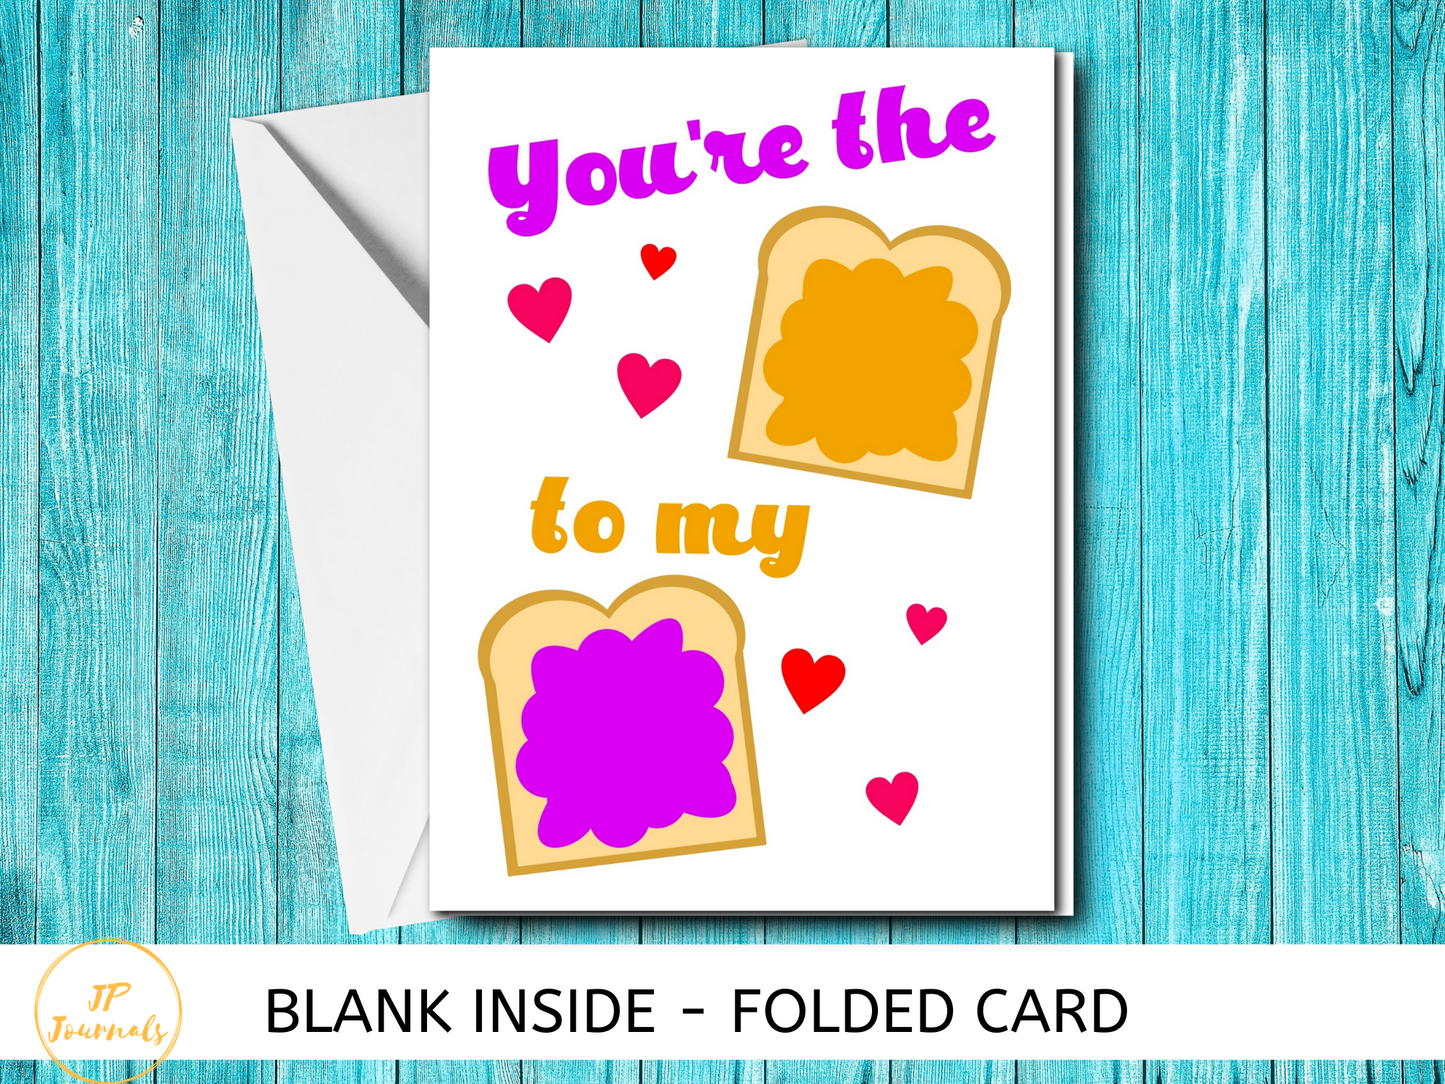 Cute Peanut Butter and Jelly Greeting Card - Best Friends, Husband, Wife, Anniversary, I Love You - You're the Peanut Butter To My Jelly